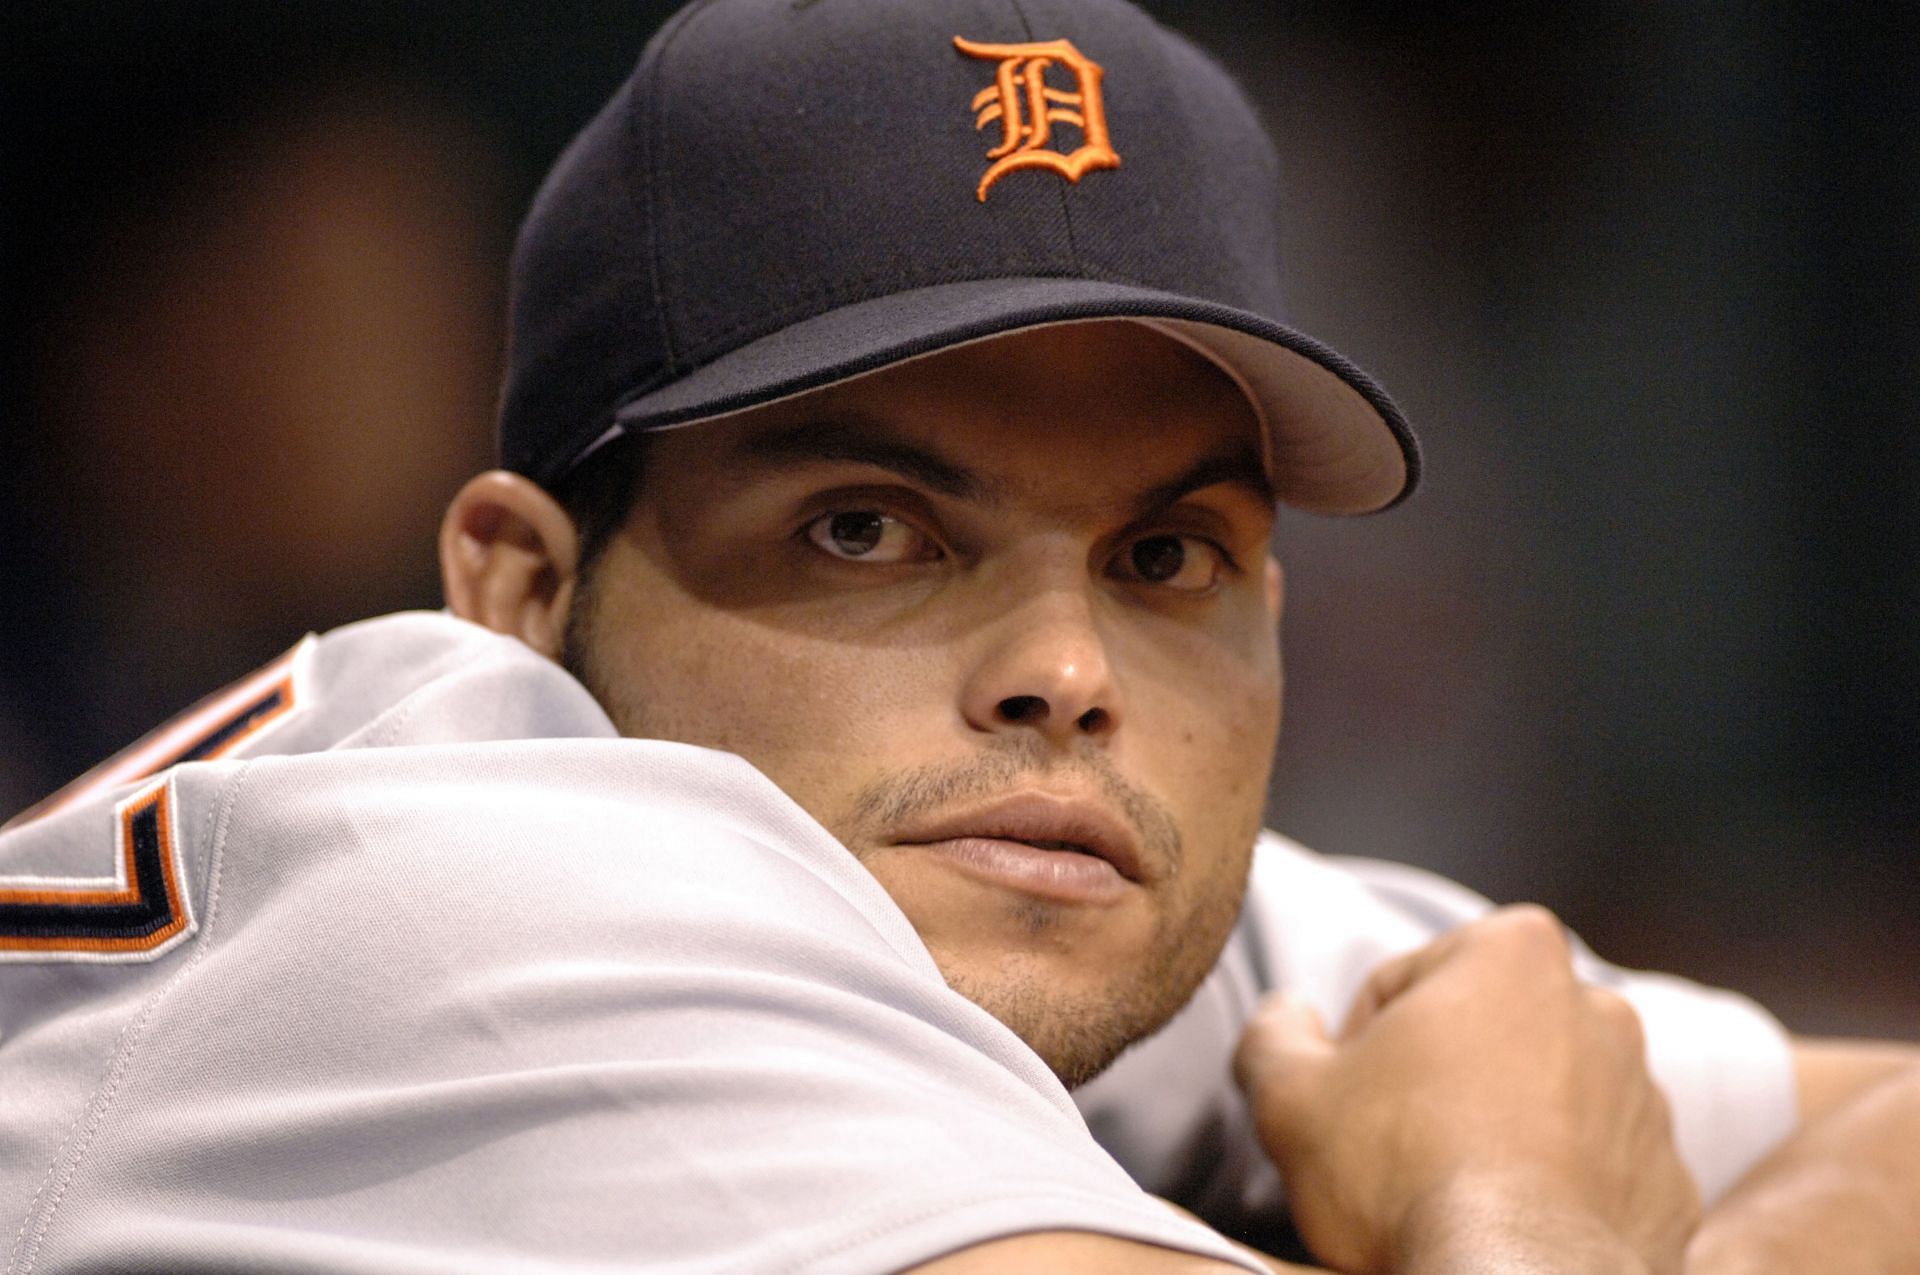 Enjoy some vintage Ivan 'Pudge' Rodriguez GIFs and moments in